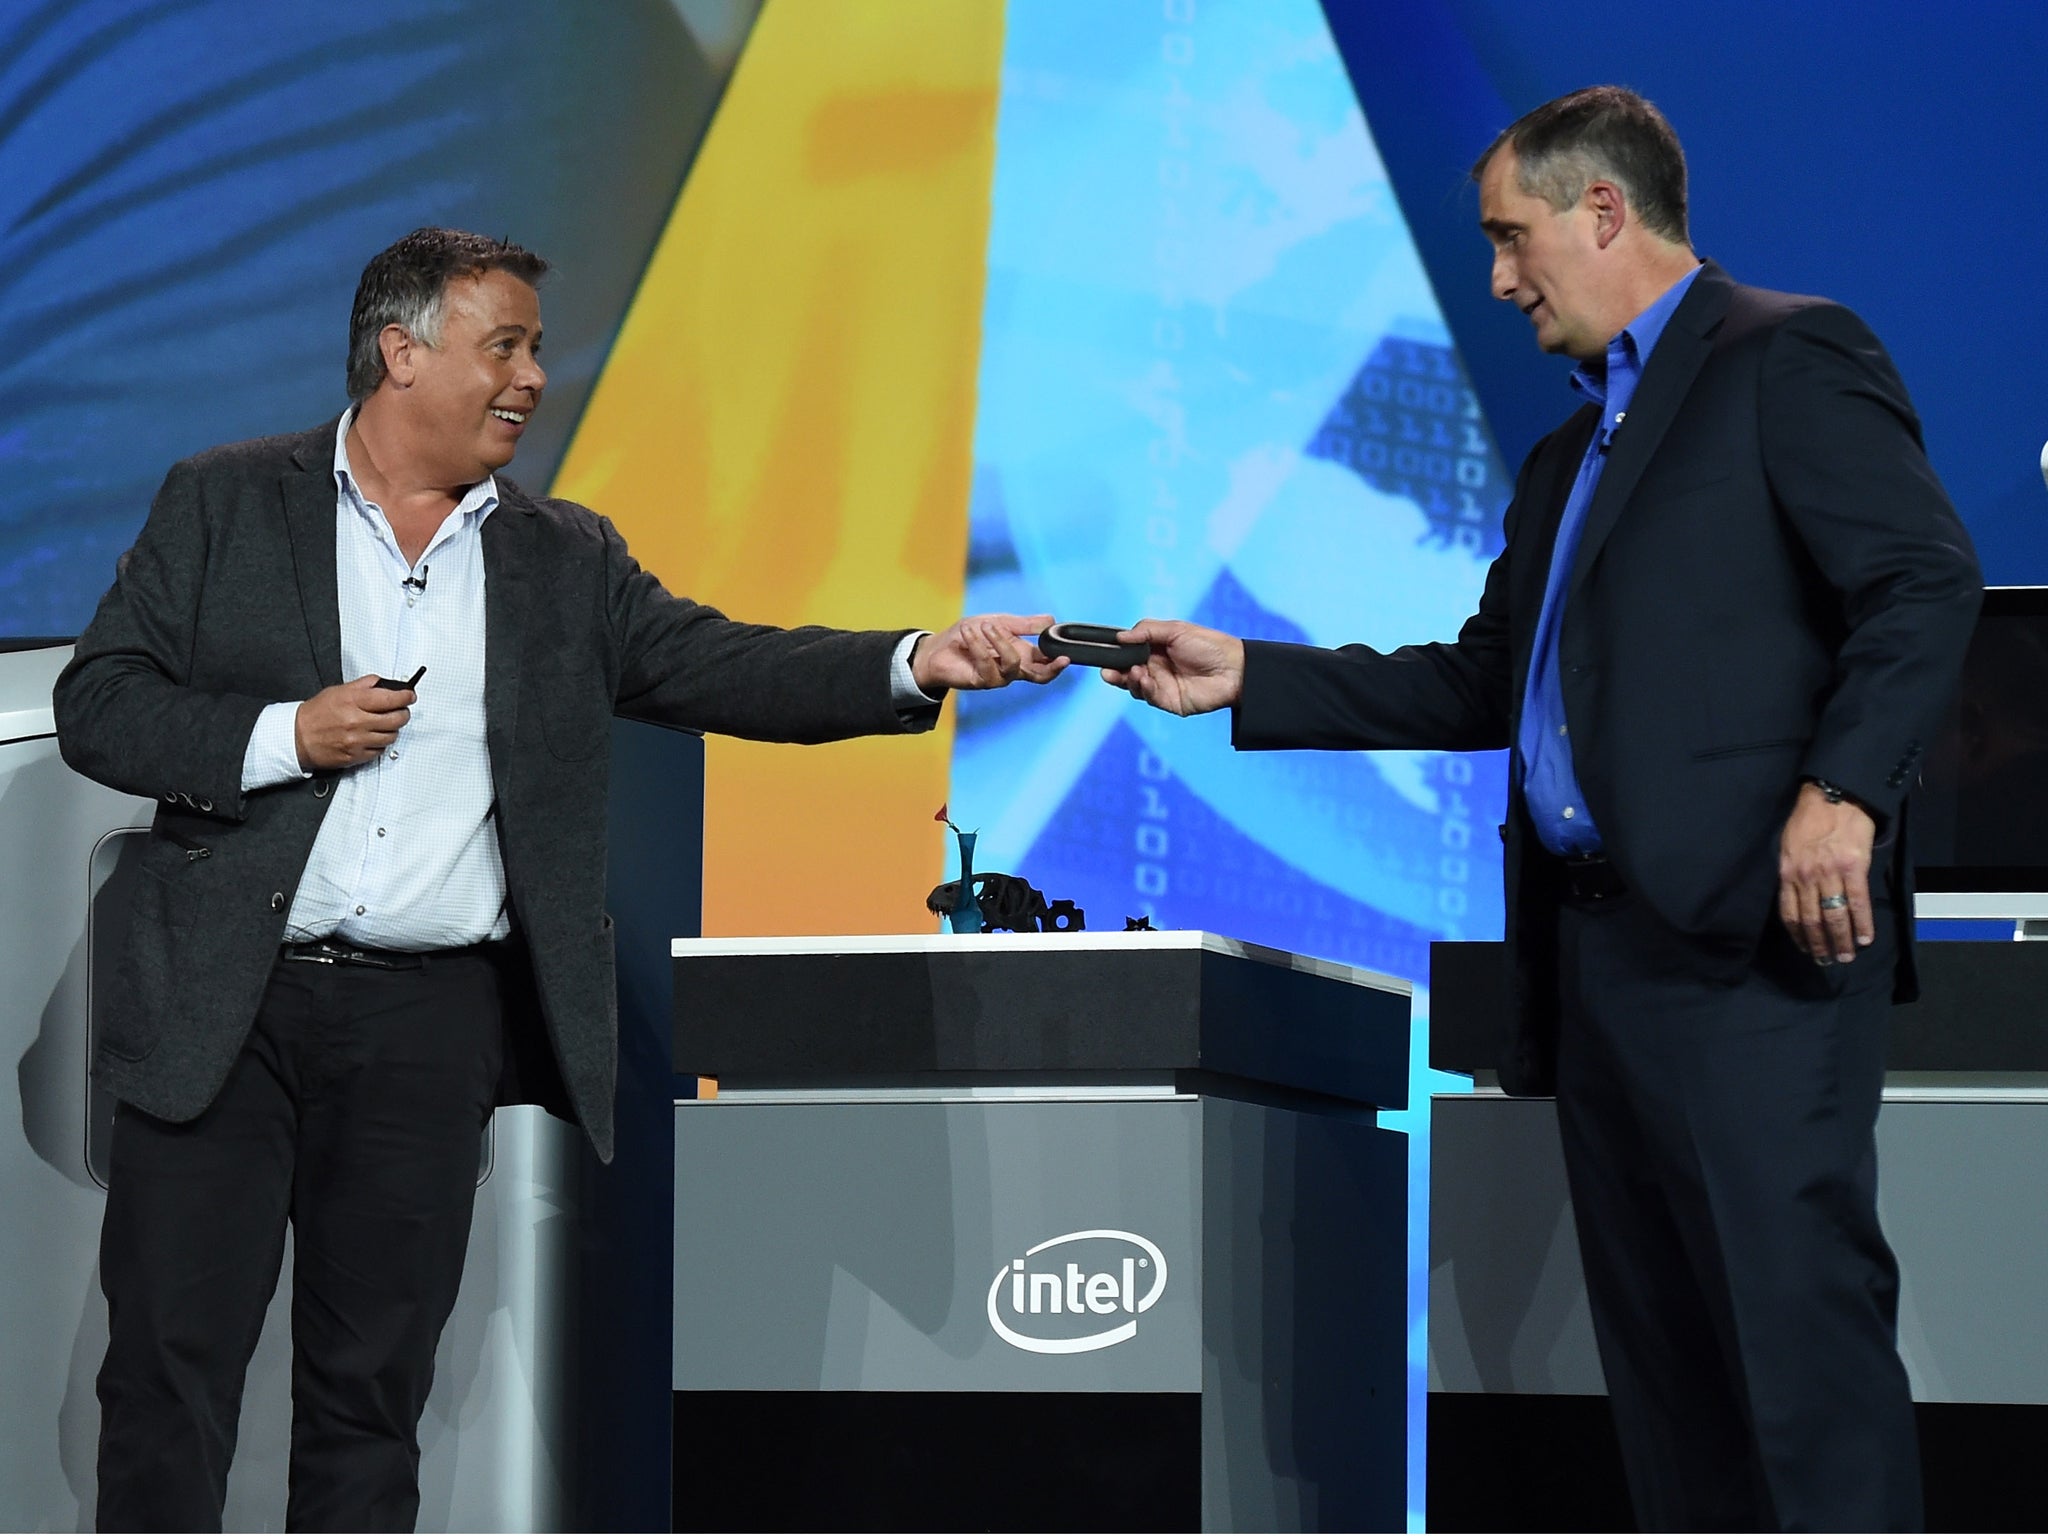 Hewlett-Packard Co. Executive Vice President of Printing &amp; Personal Systems Dion Weisler (L) shows a link made by a Hewlett-Packard 3D printer to Intel CEO Brian Krzanich during his keynote address